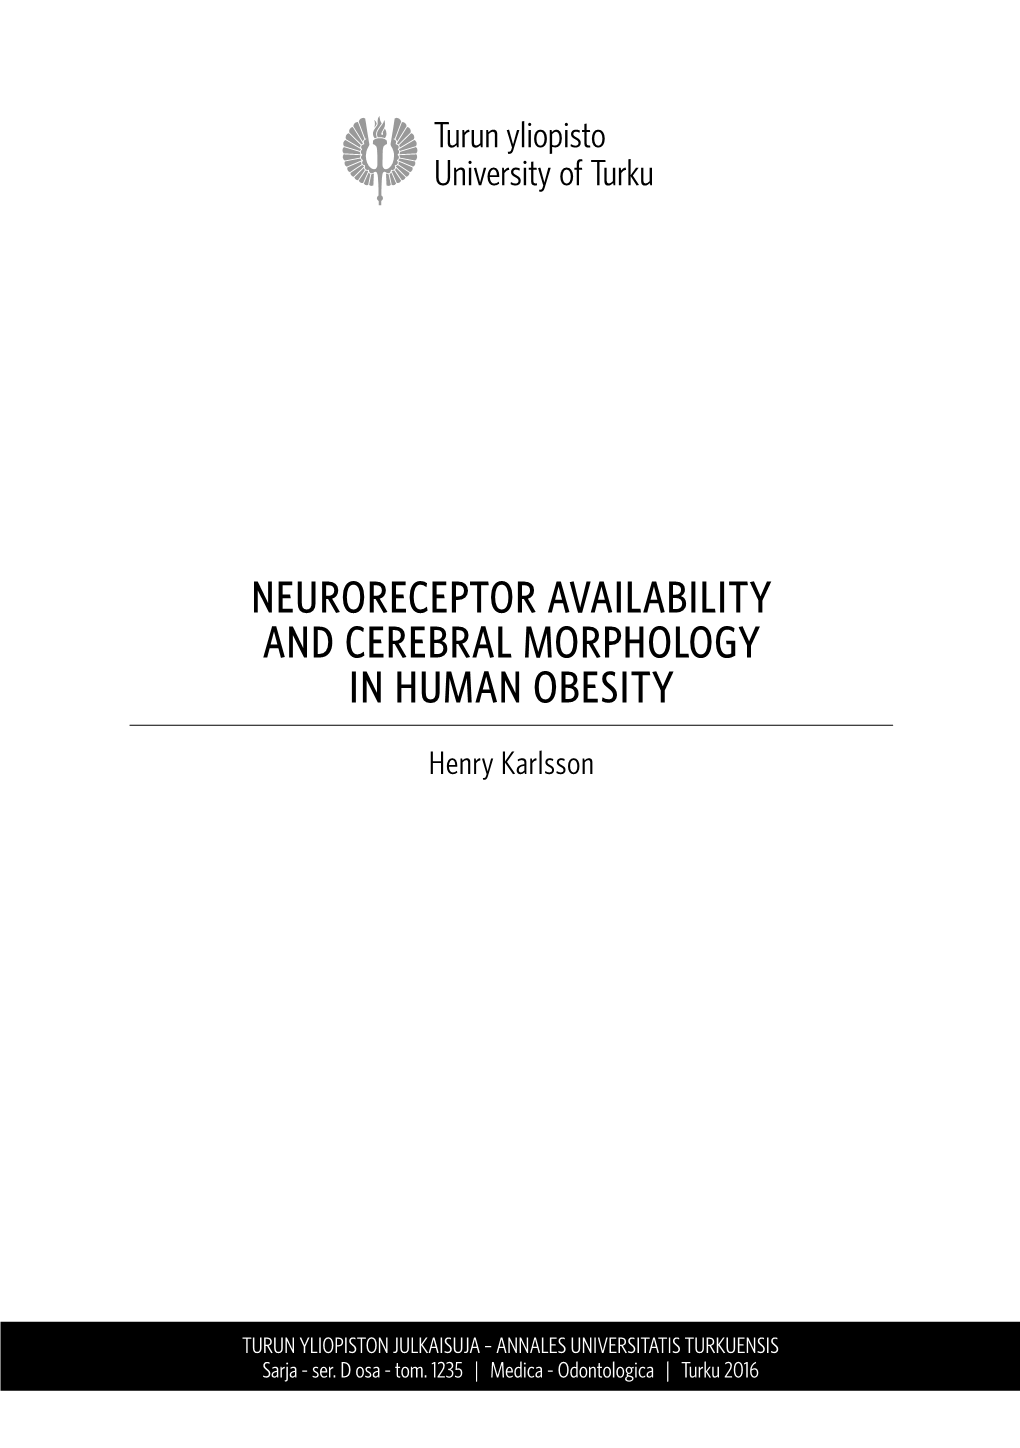 Neuroreceptor Availability and Cerebral Morphology in Human Obesity